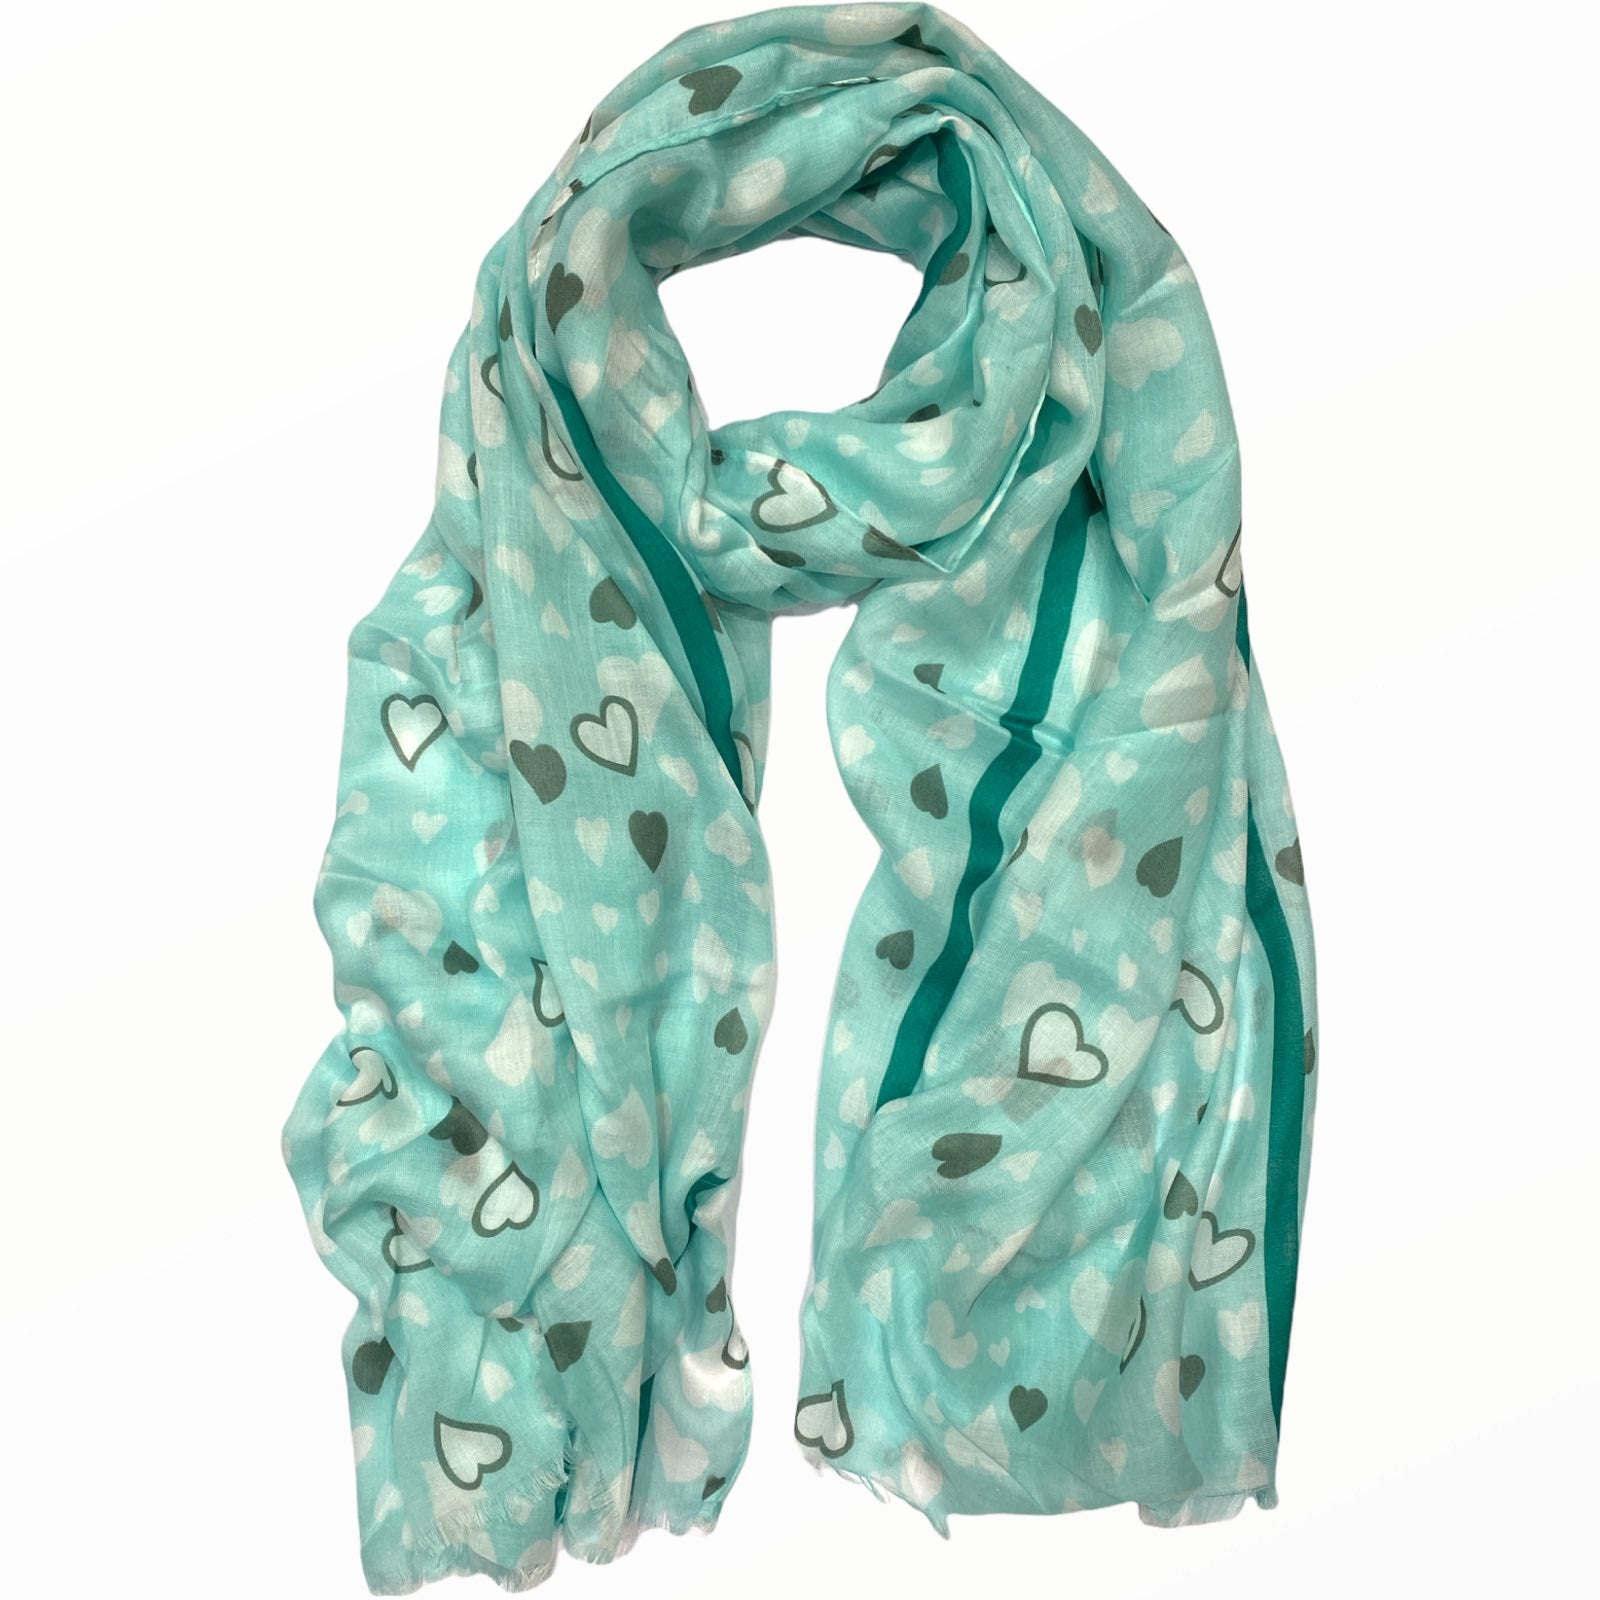 Mint hearts scarf